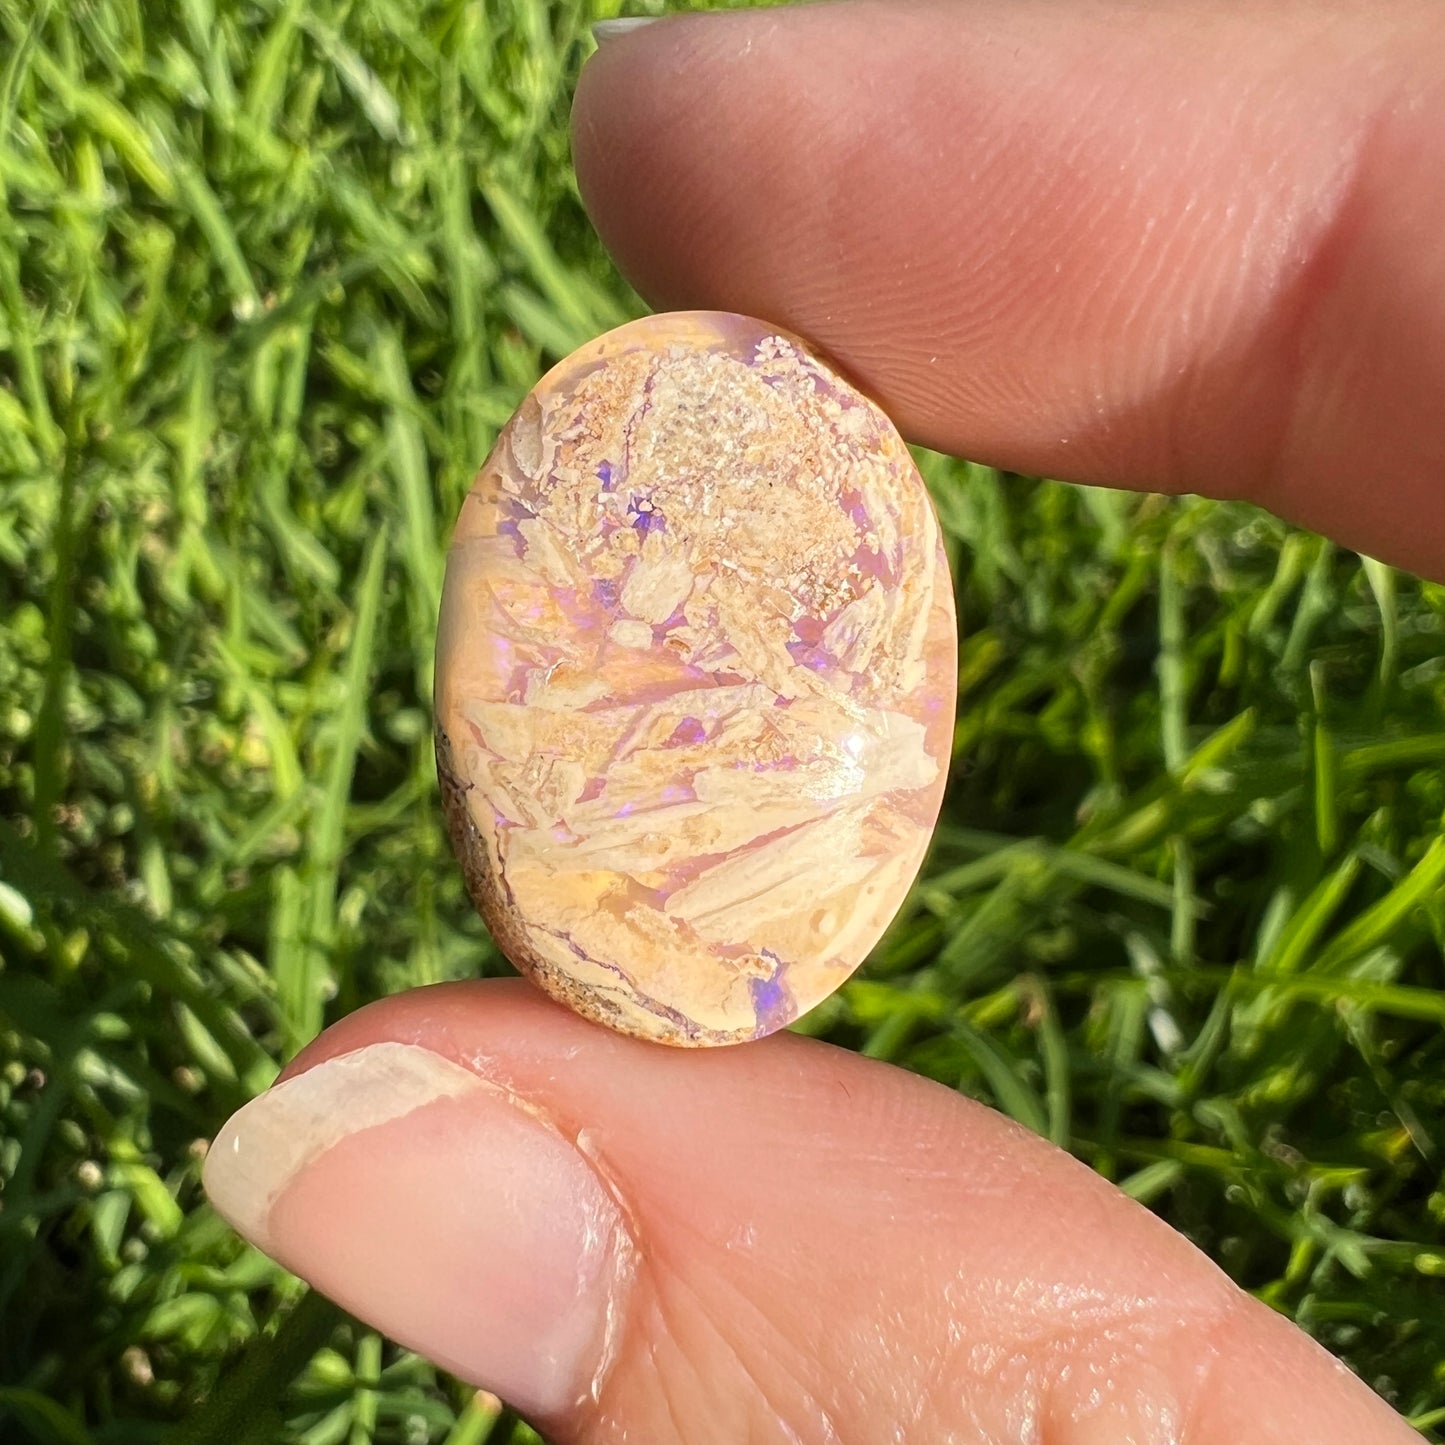 11.71 Ct 3D Wood replacement opal